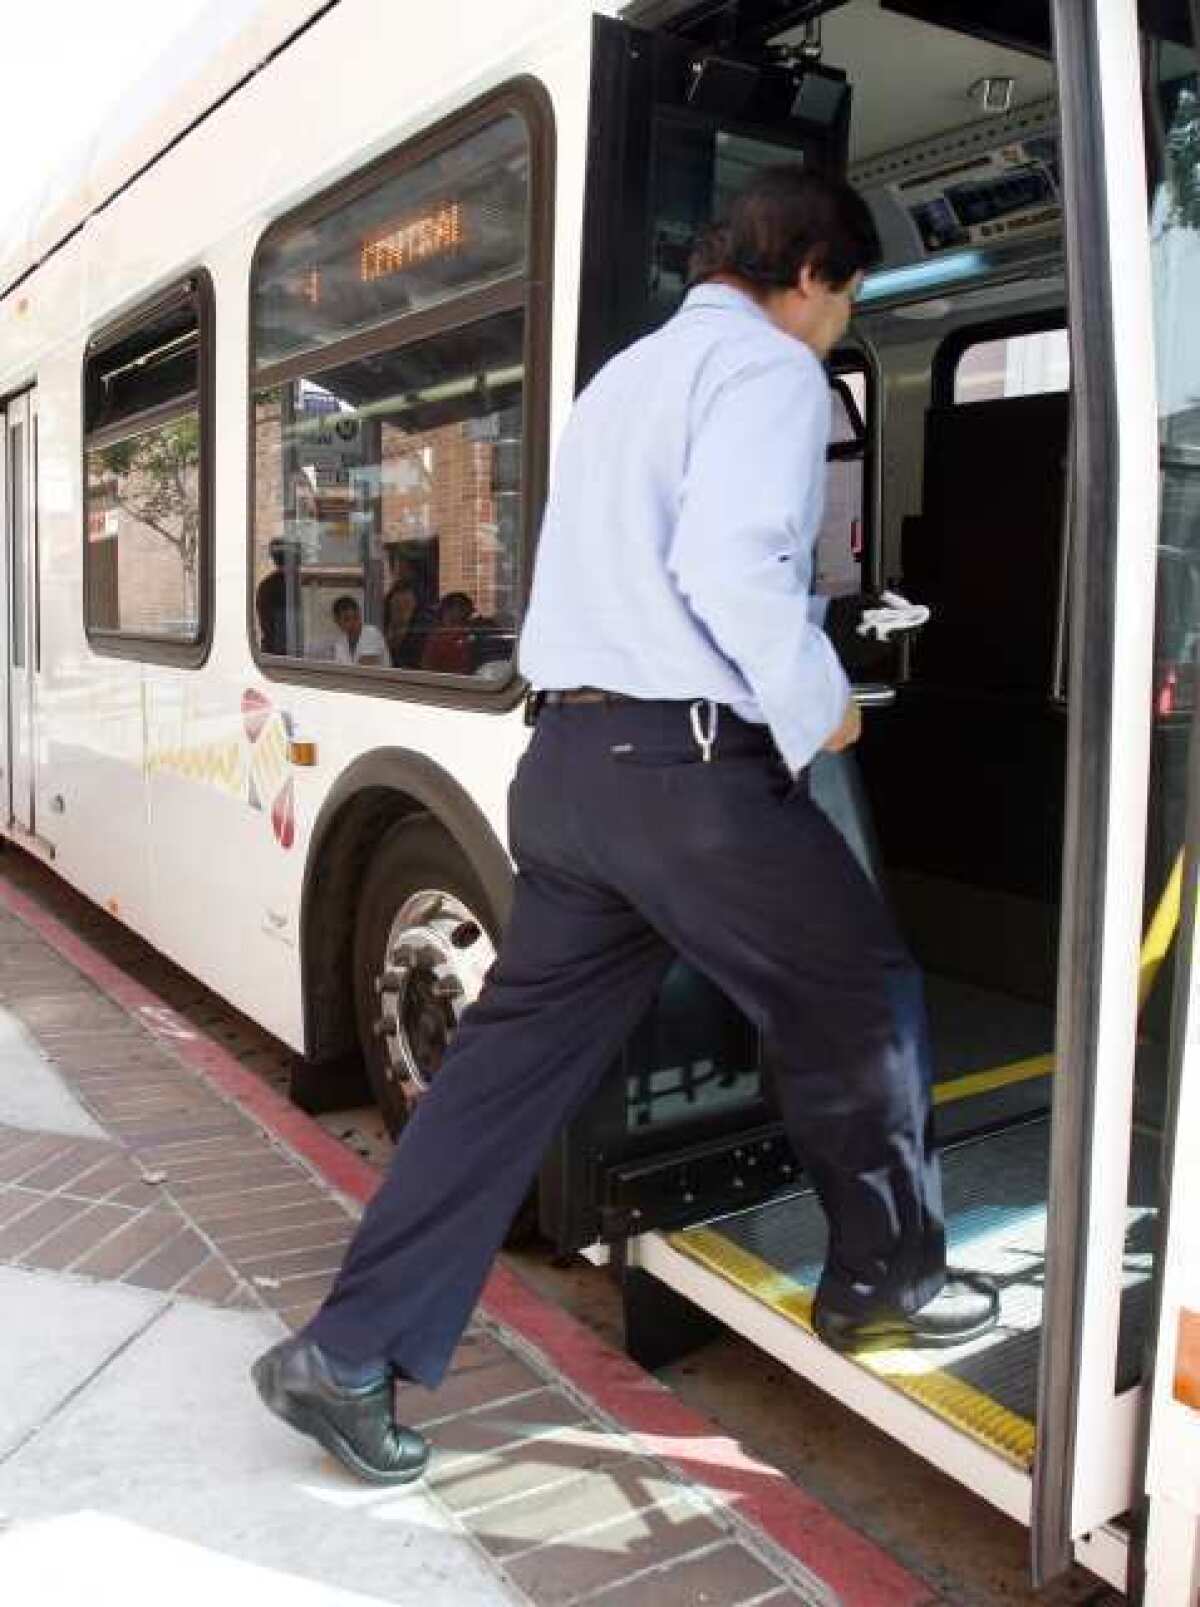 A Glendale Beeline bus driver returns to his bus on Brand Boulevard. Transportation officials are working on a $754,000 website to make it easier for commuters to find routes through Glendale, Burbank, La Canada and Pasadena.